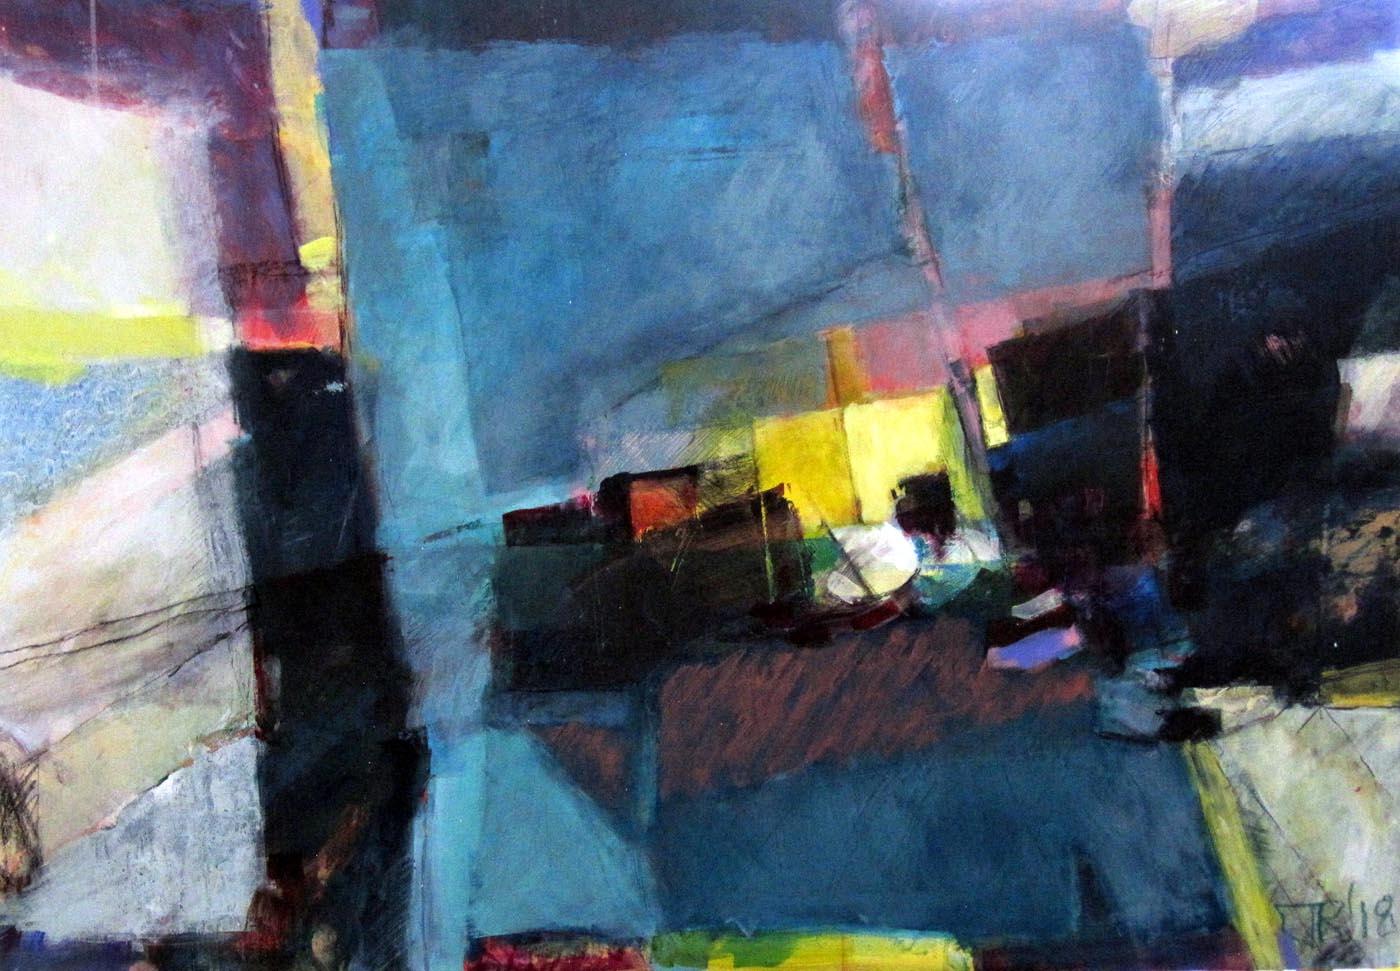 Untitled Paxos #4 - large blue abstract expressionist landscape, yellow, pink 